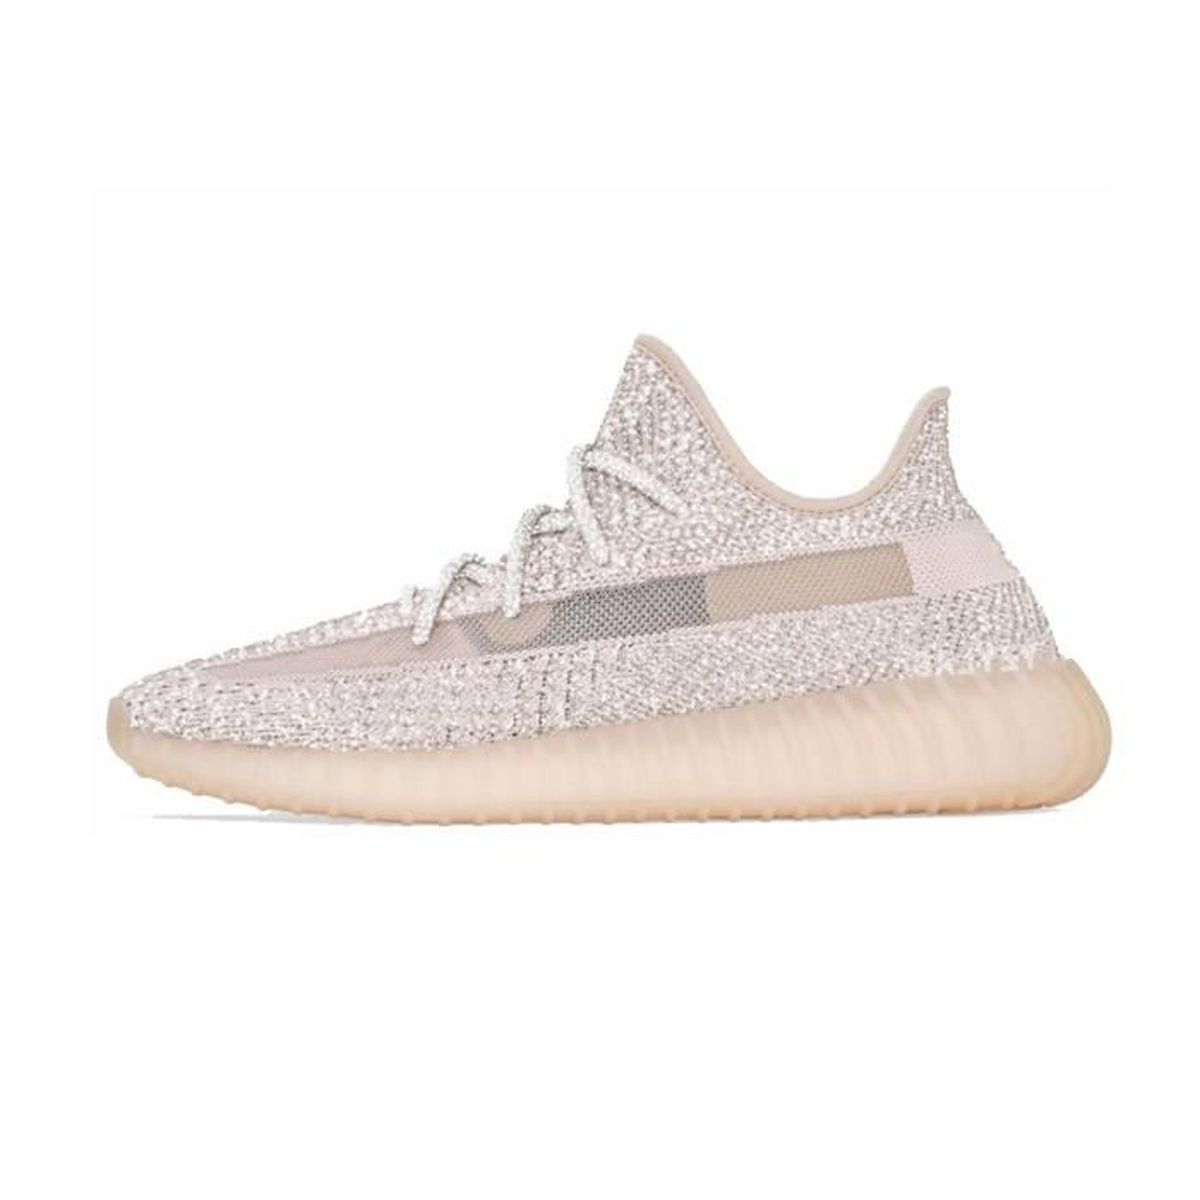 adidas yeezy boost 350 homme rose